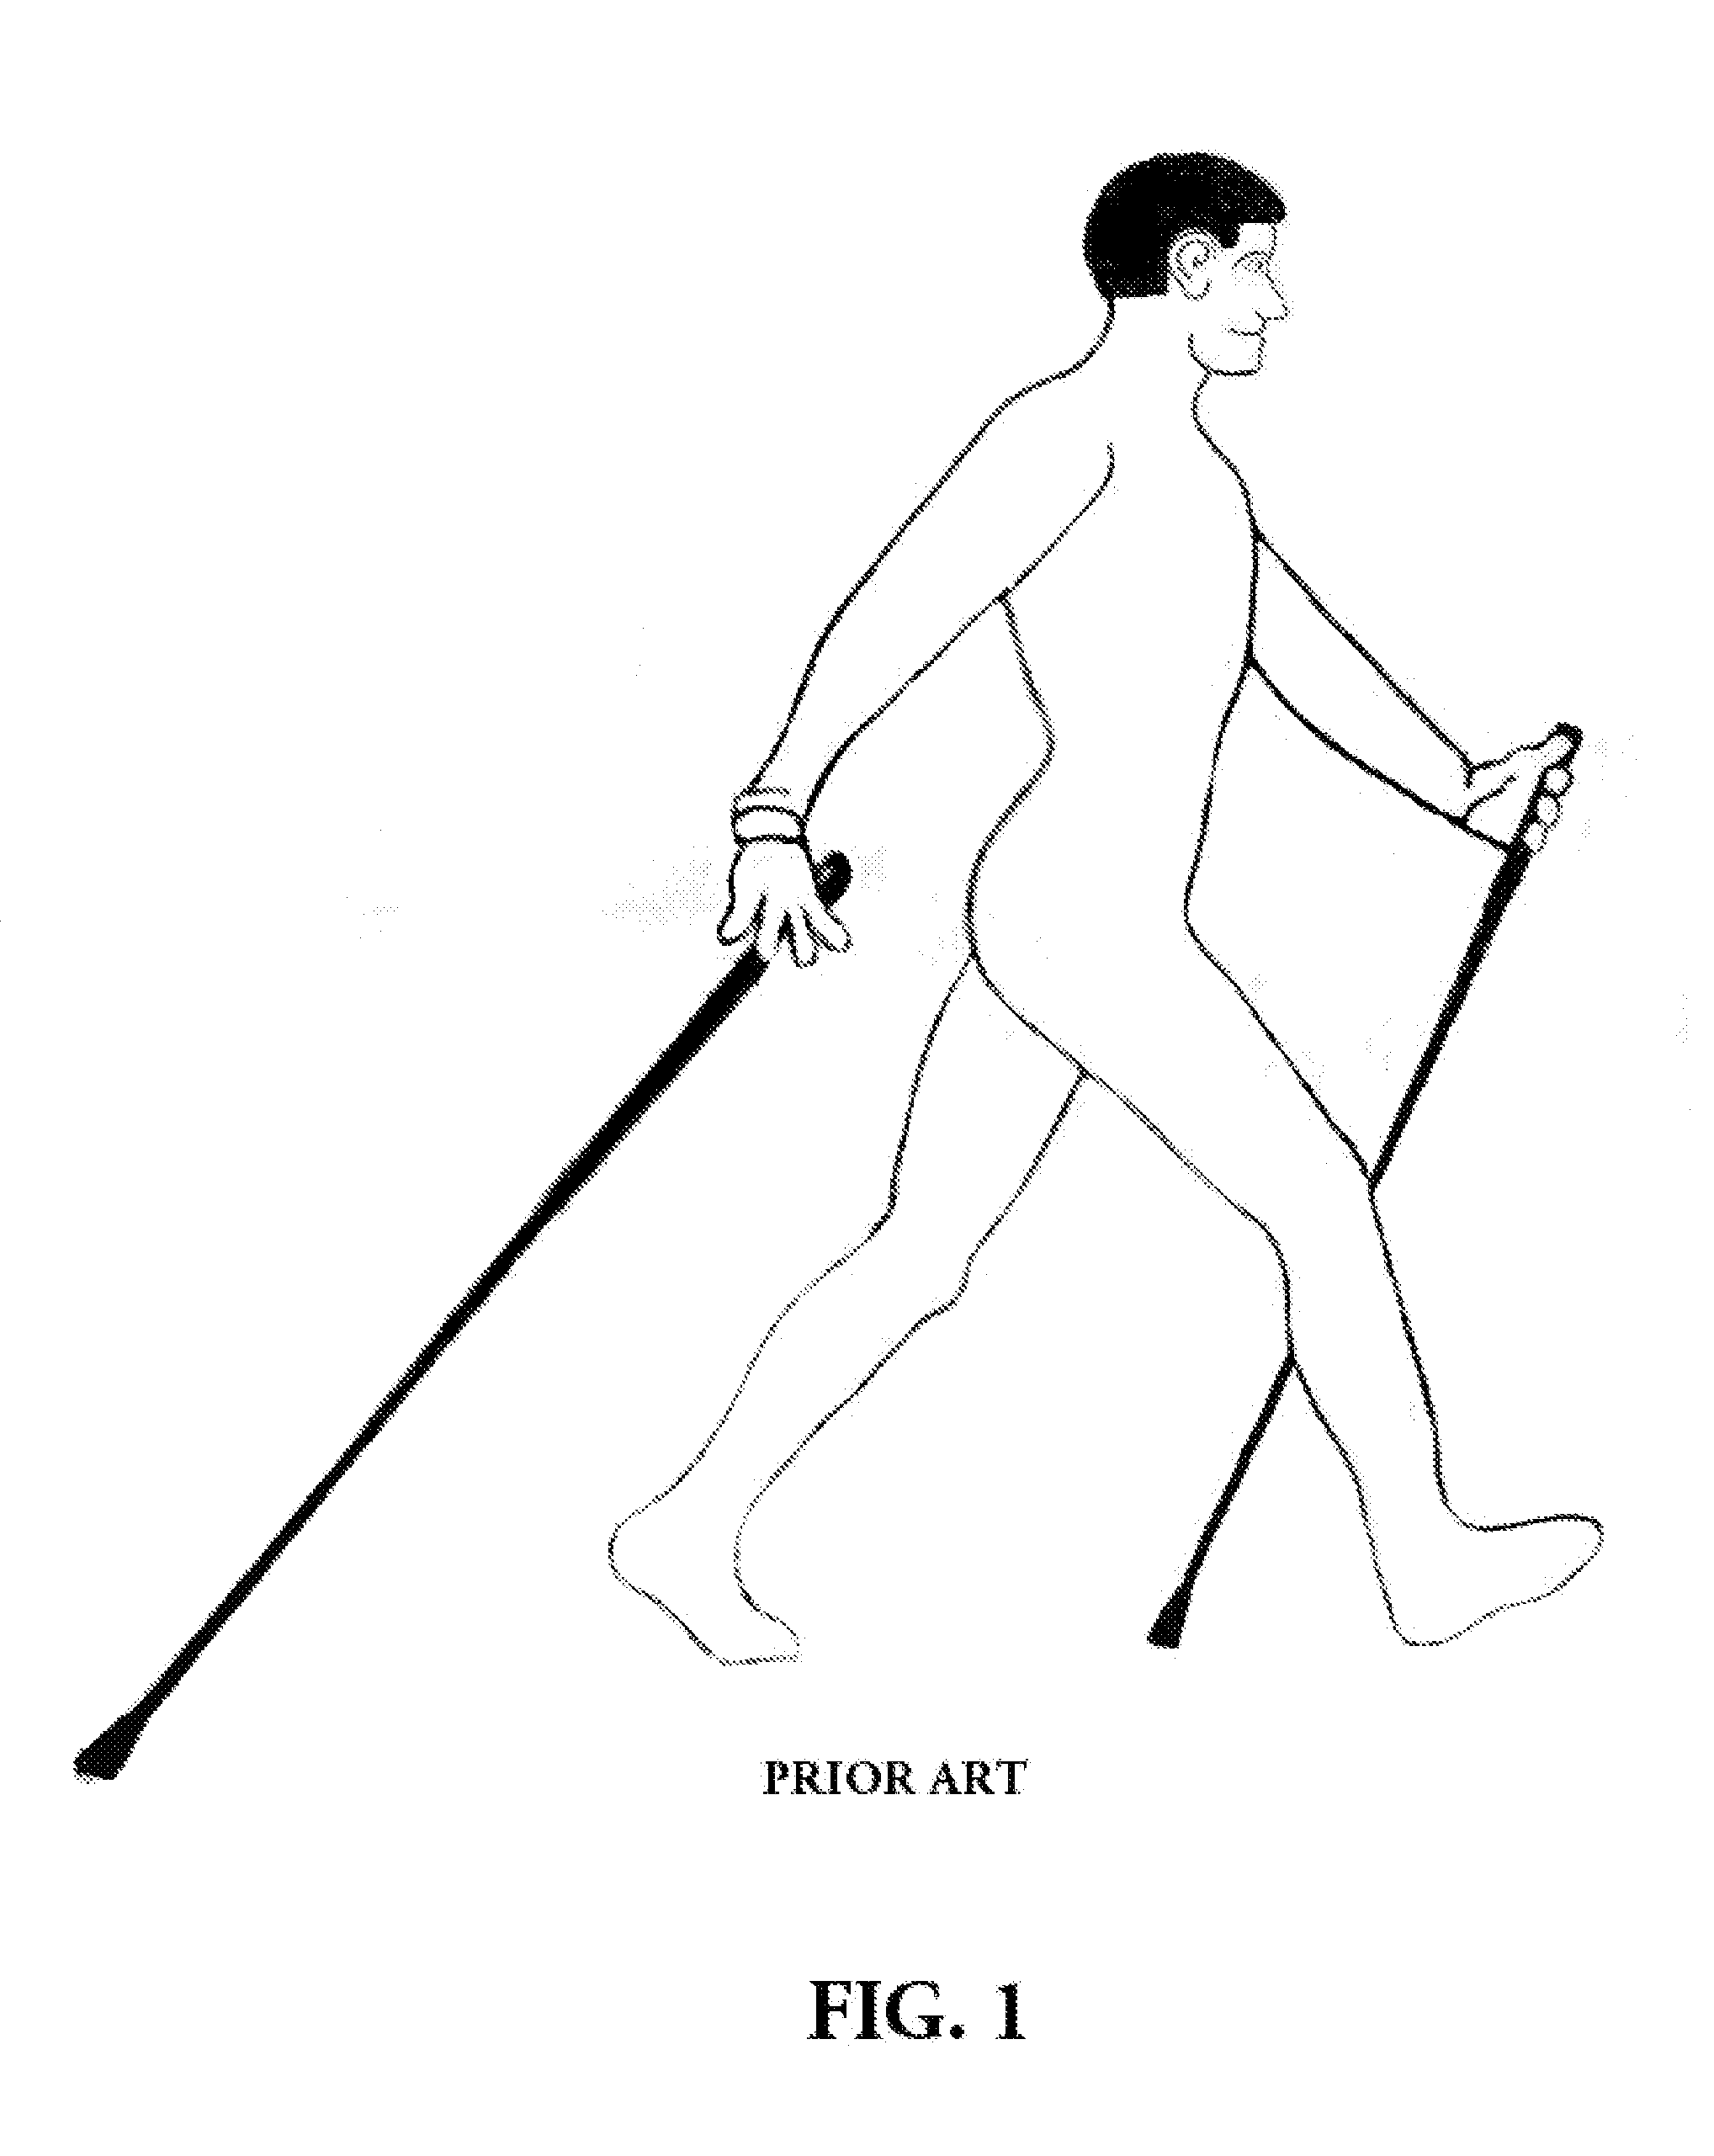 Walking Stick with S-Shaped Flexure Mechanism to Store and Release Energy